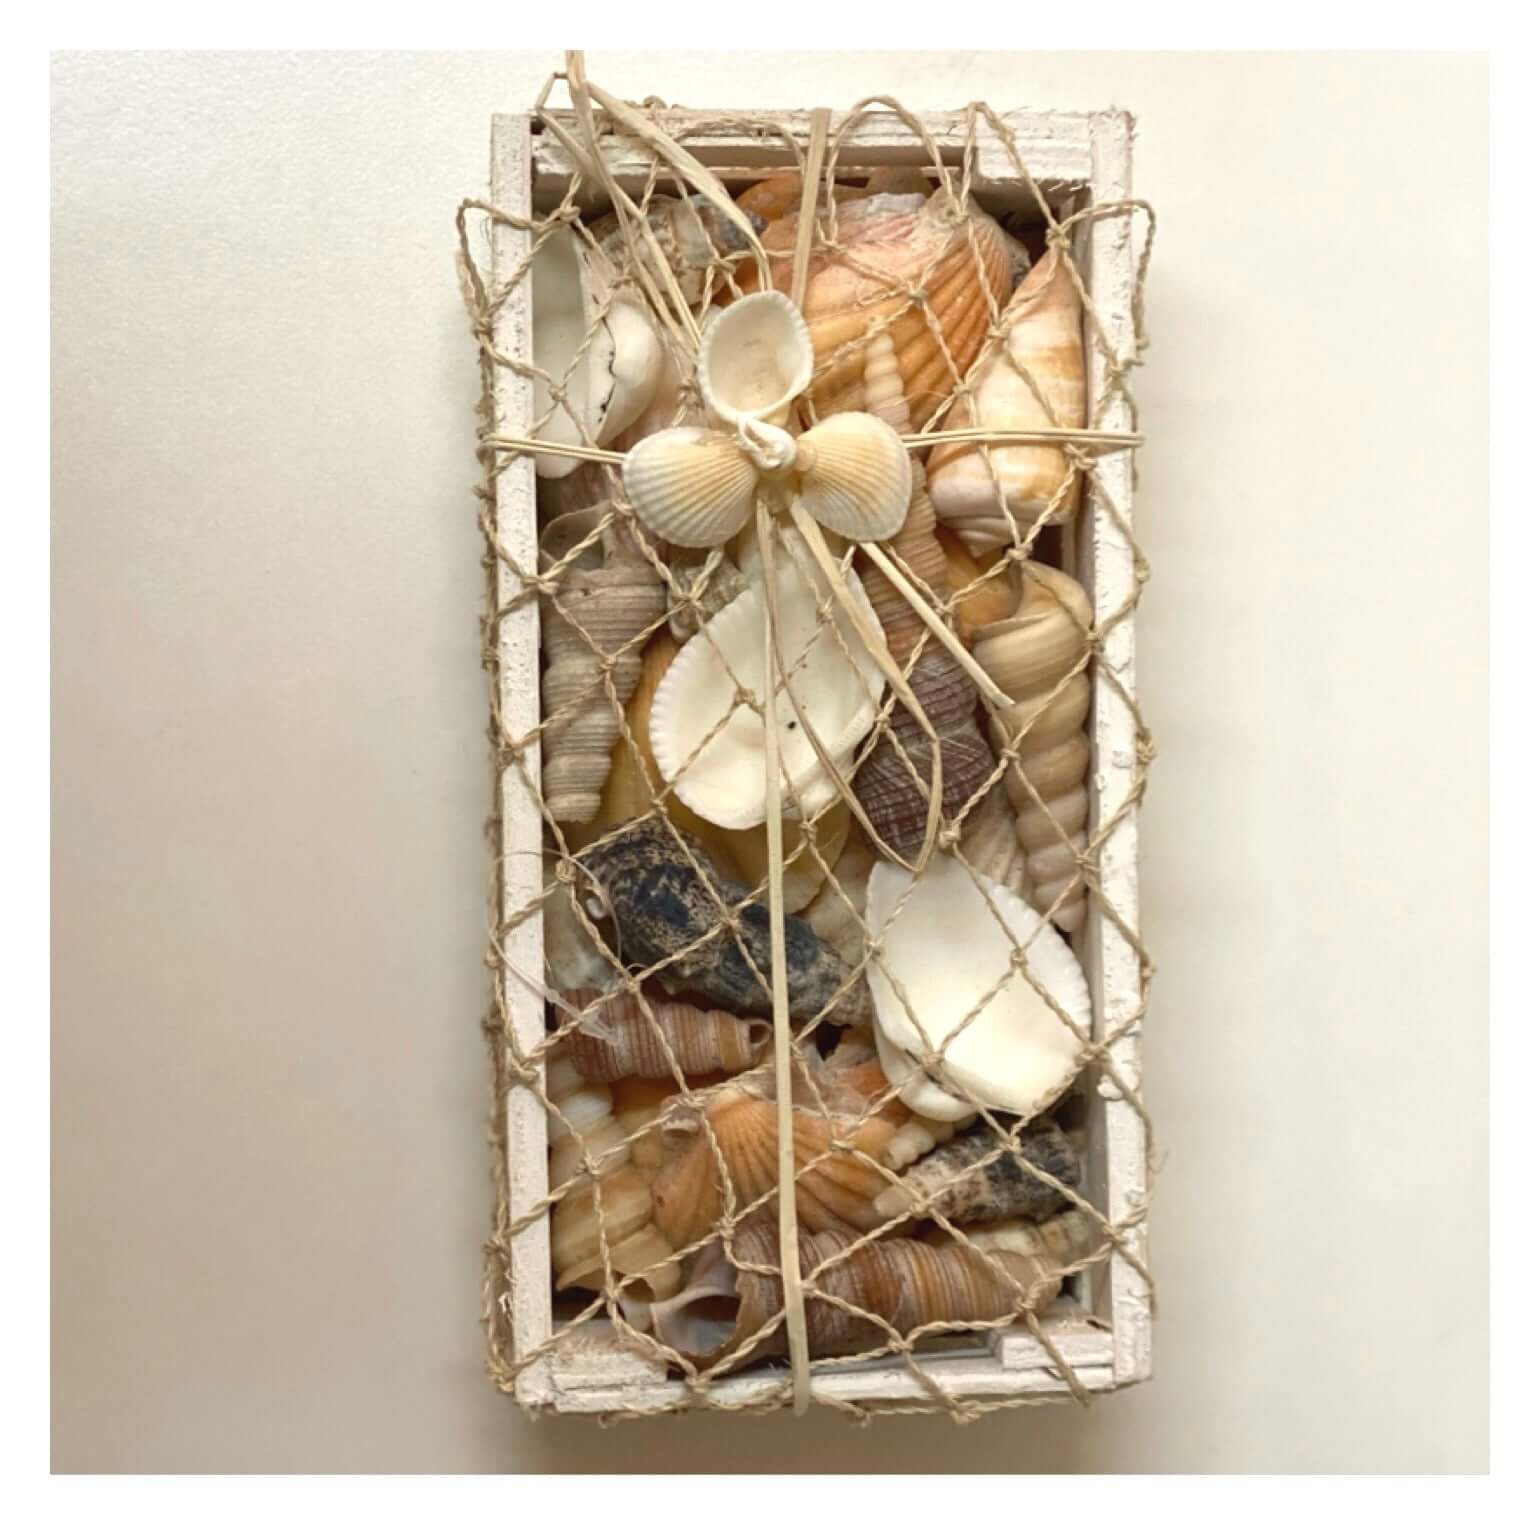 Beach Shell Collection with Starfish Med - The Renmy Store Homewares & Gifts 